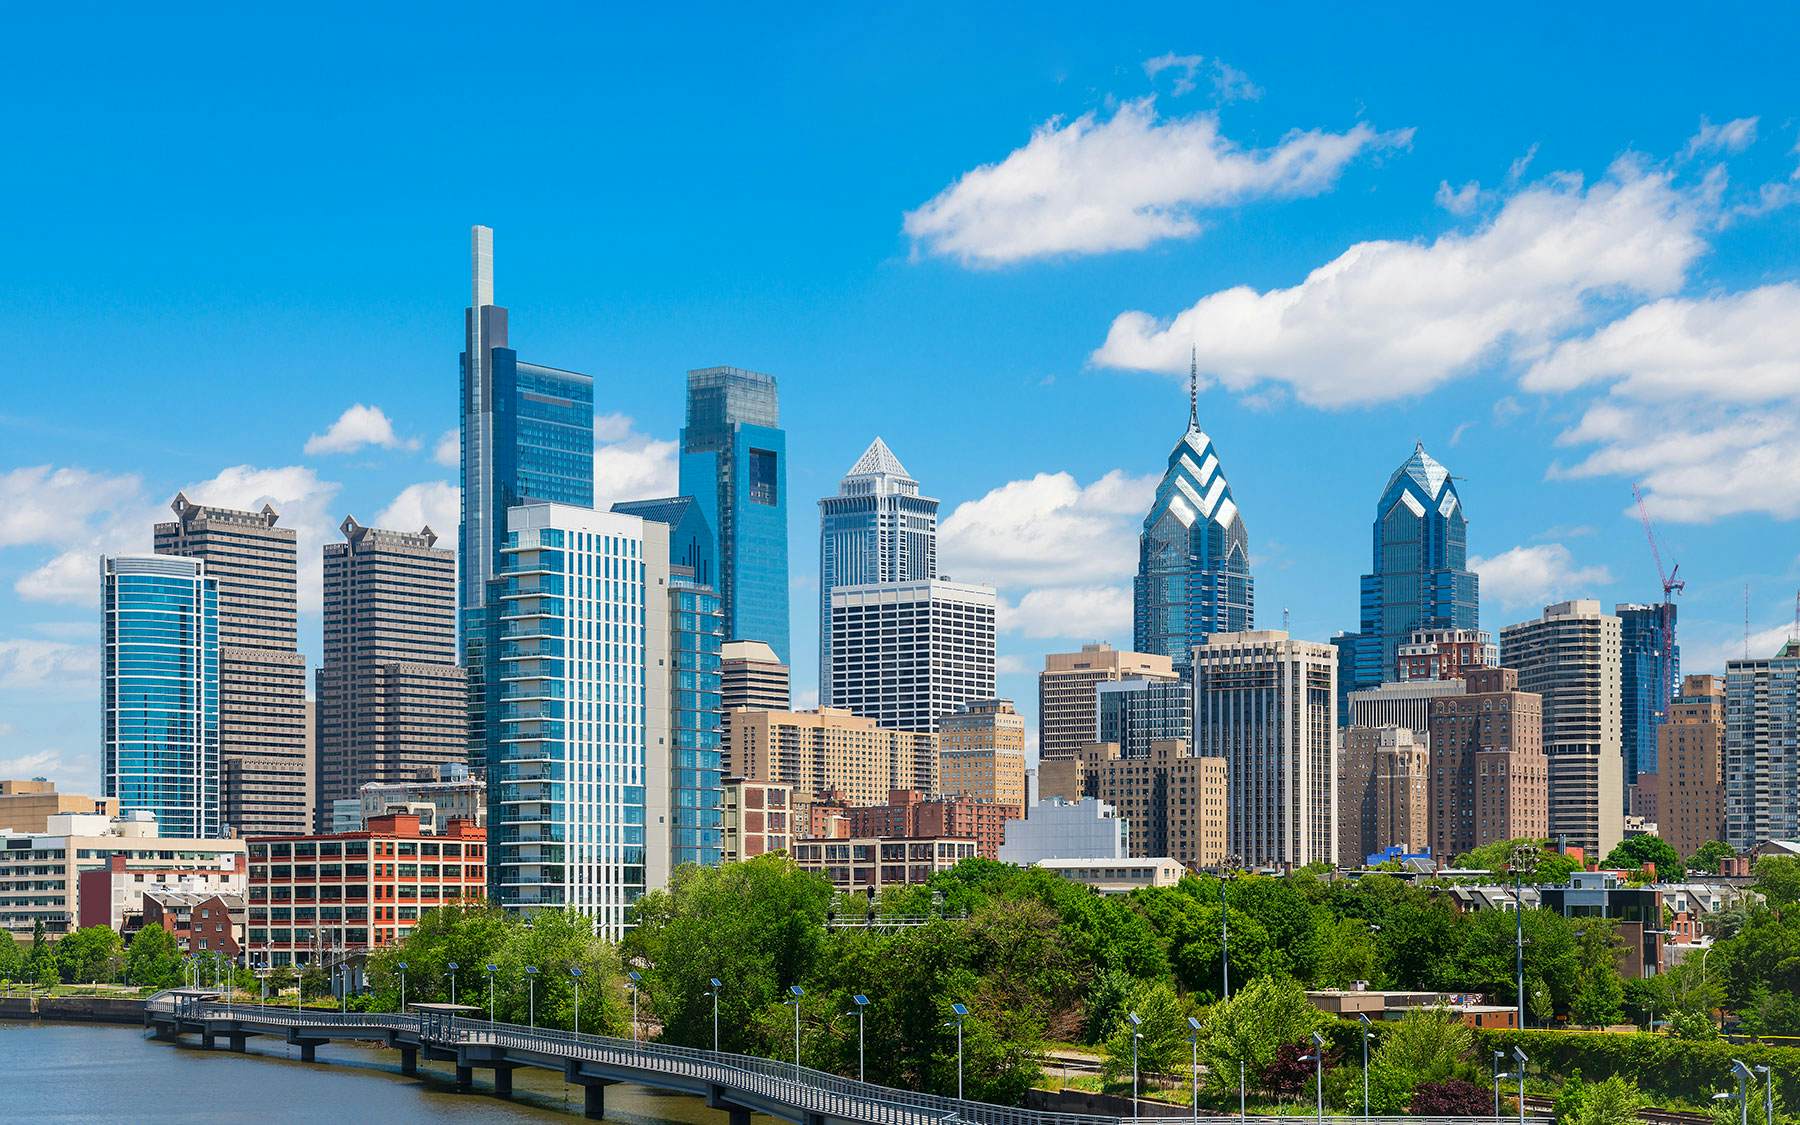 Philadelphia, PA Alcohol Delivery in 1 Hour | Drizly